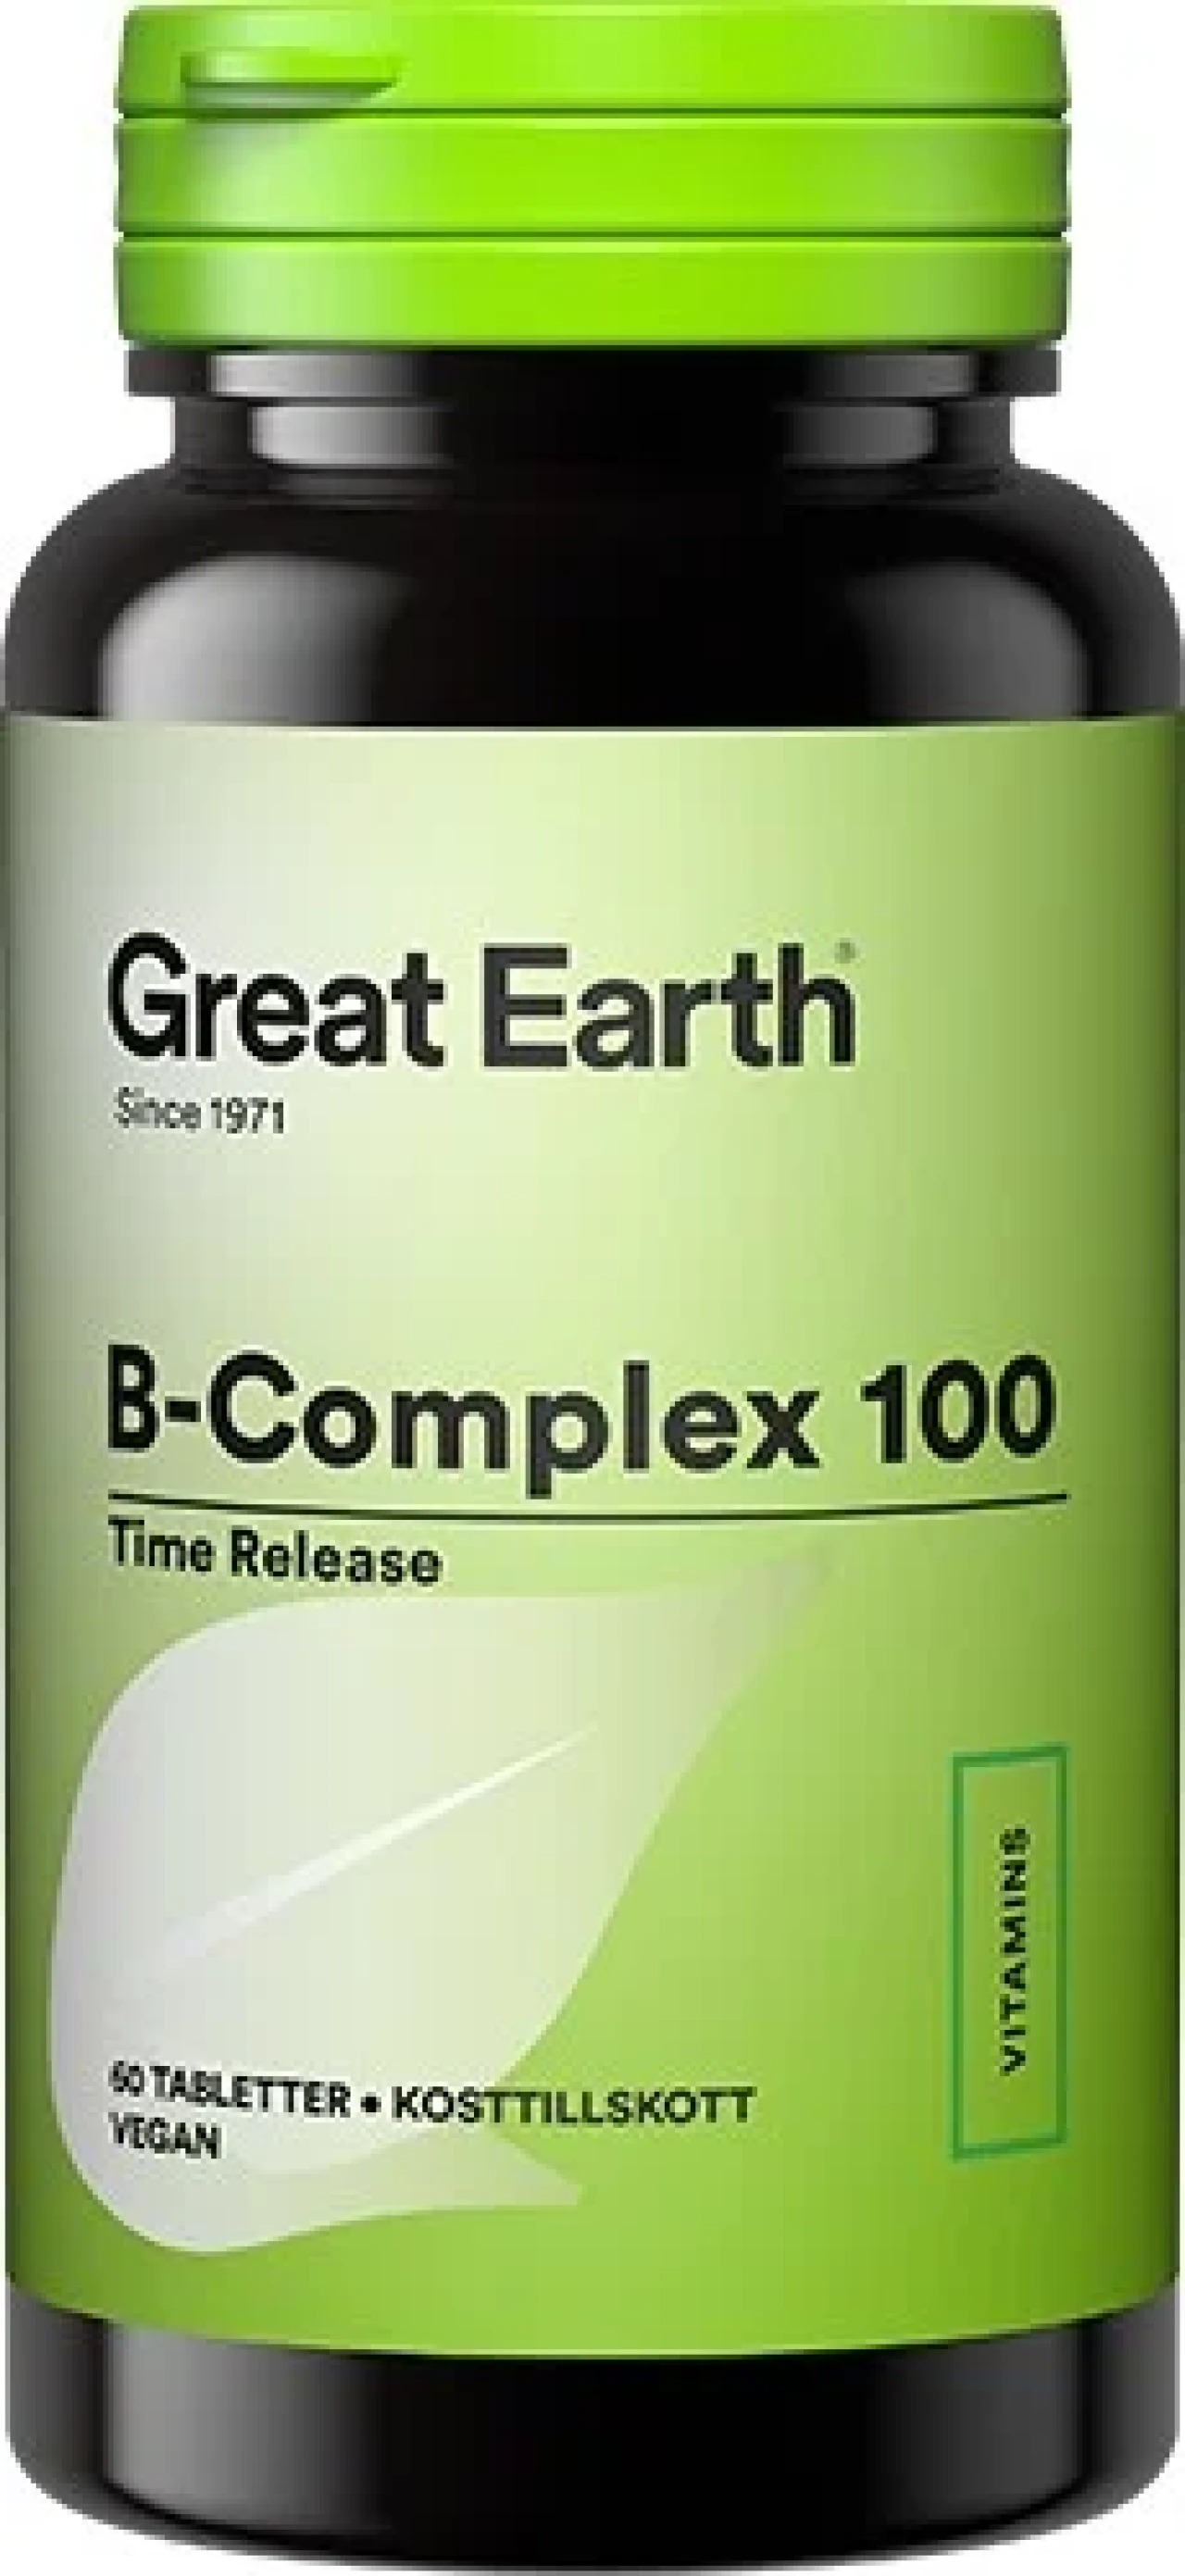 Great Earth B-Complex 100